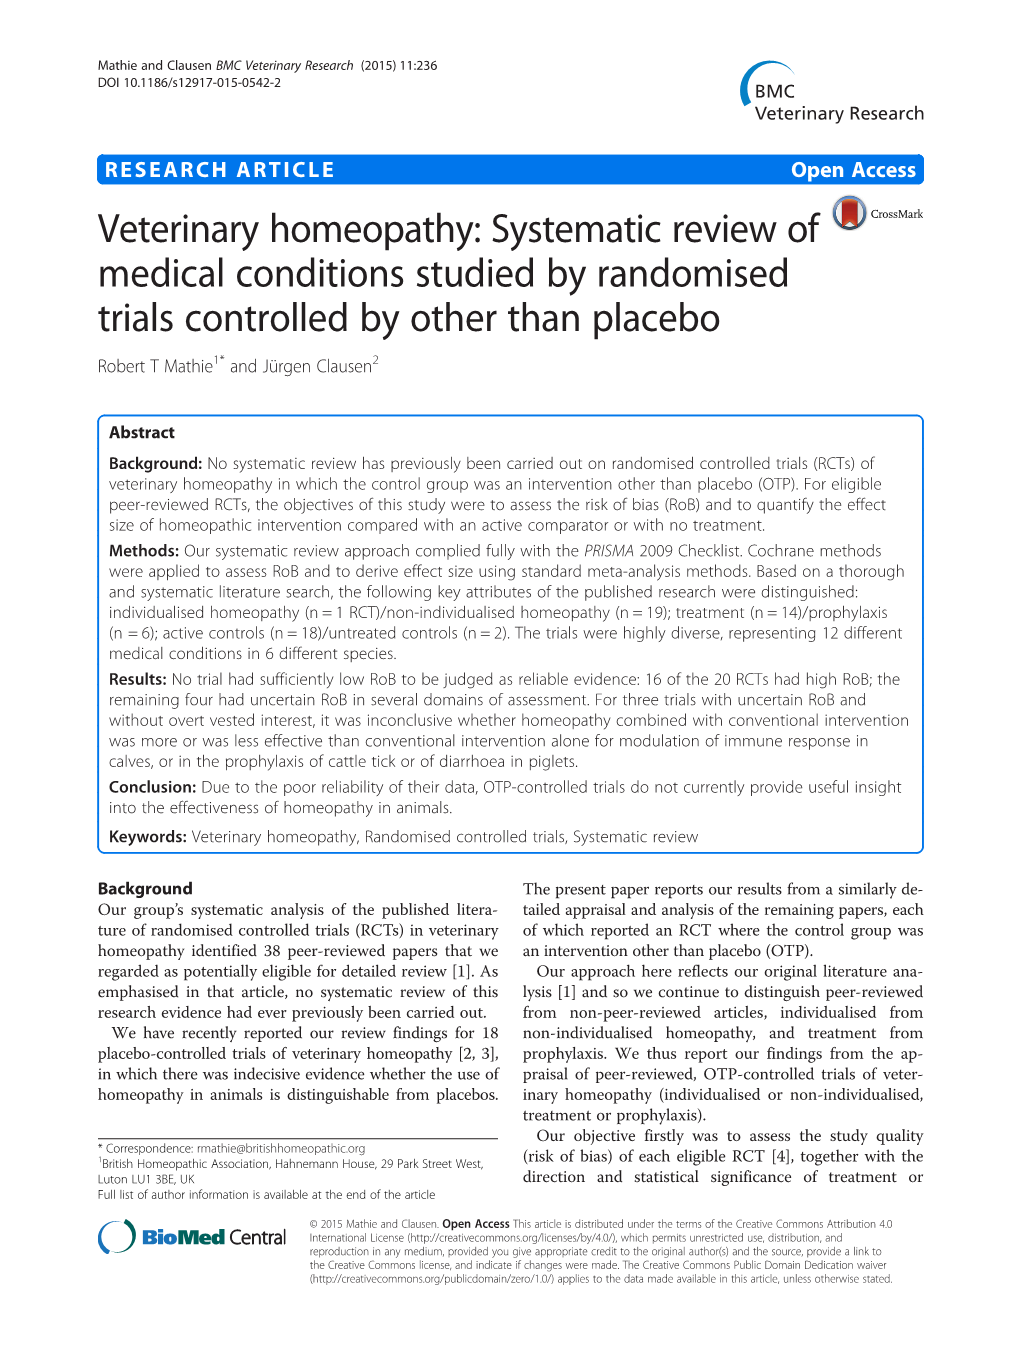 Veterinary Homeopathy: Systematic Review of Medical Conditions Studied by Randomised Trials Controlled by Other Than Placebo Robert T Mathie1* and Jürgen Clausen2